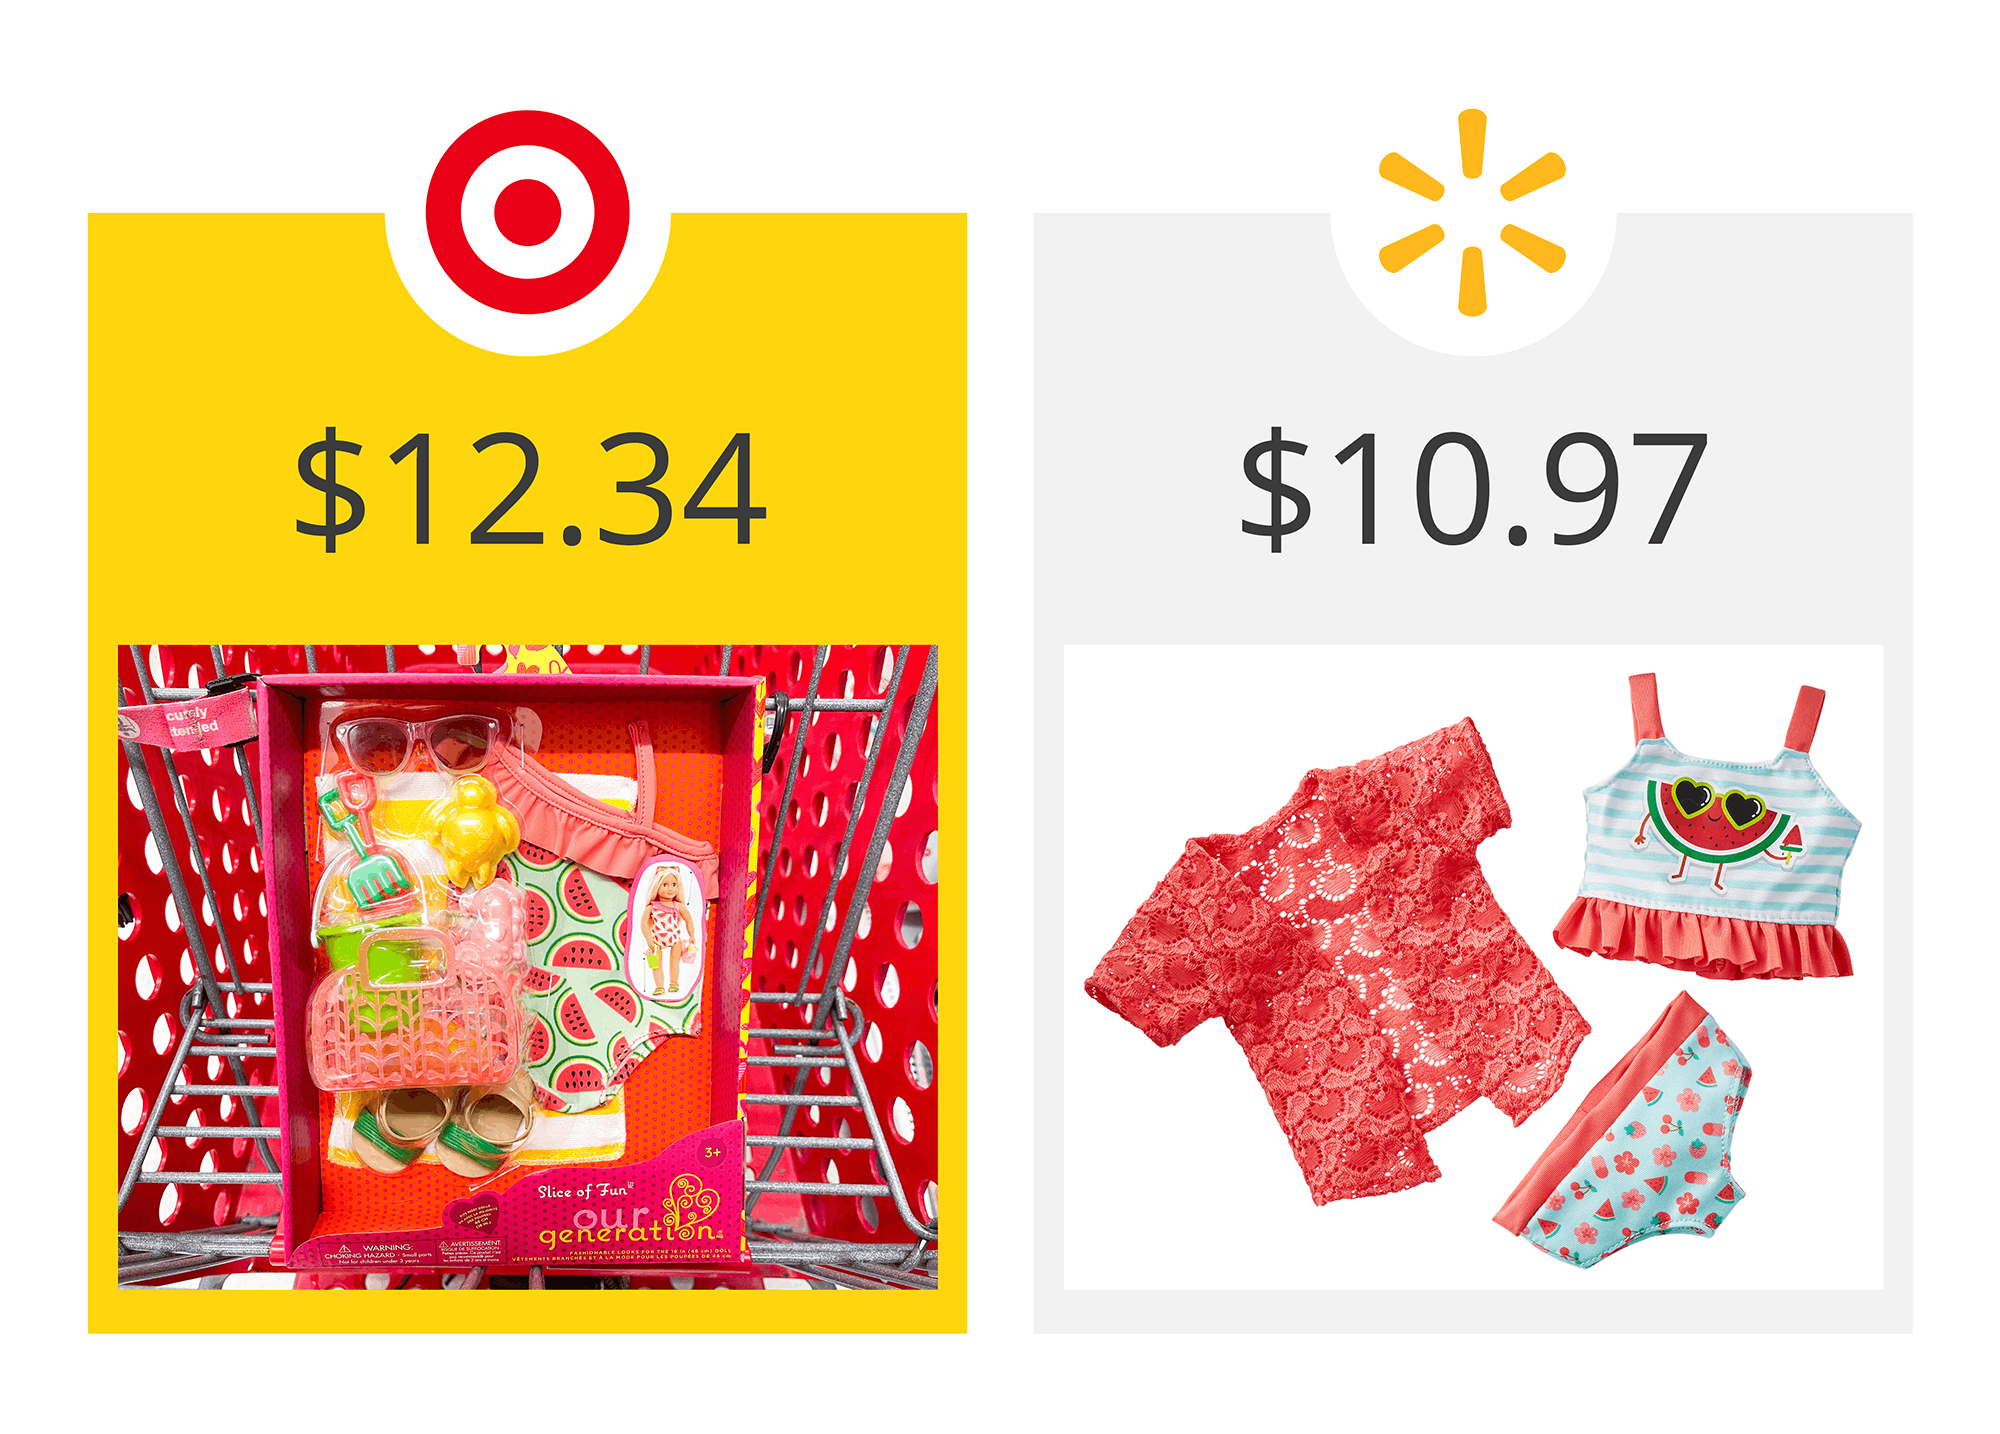 target as the winner on a graphic showing price comparison between target's our generation and walmart's my life as doll swim sets